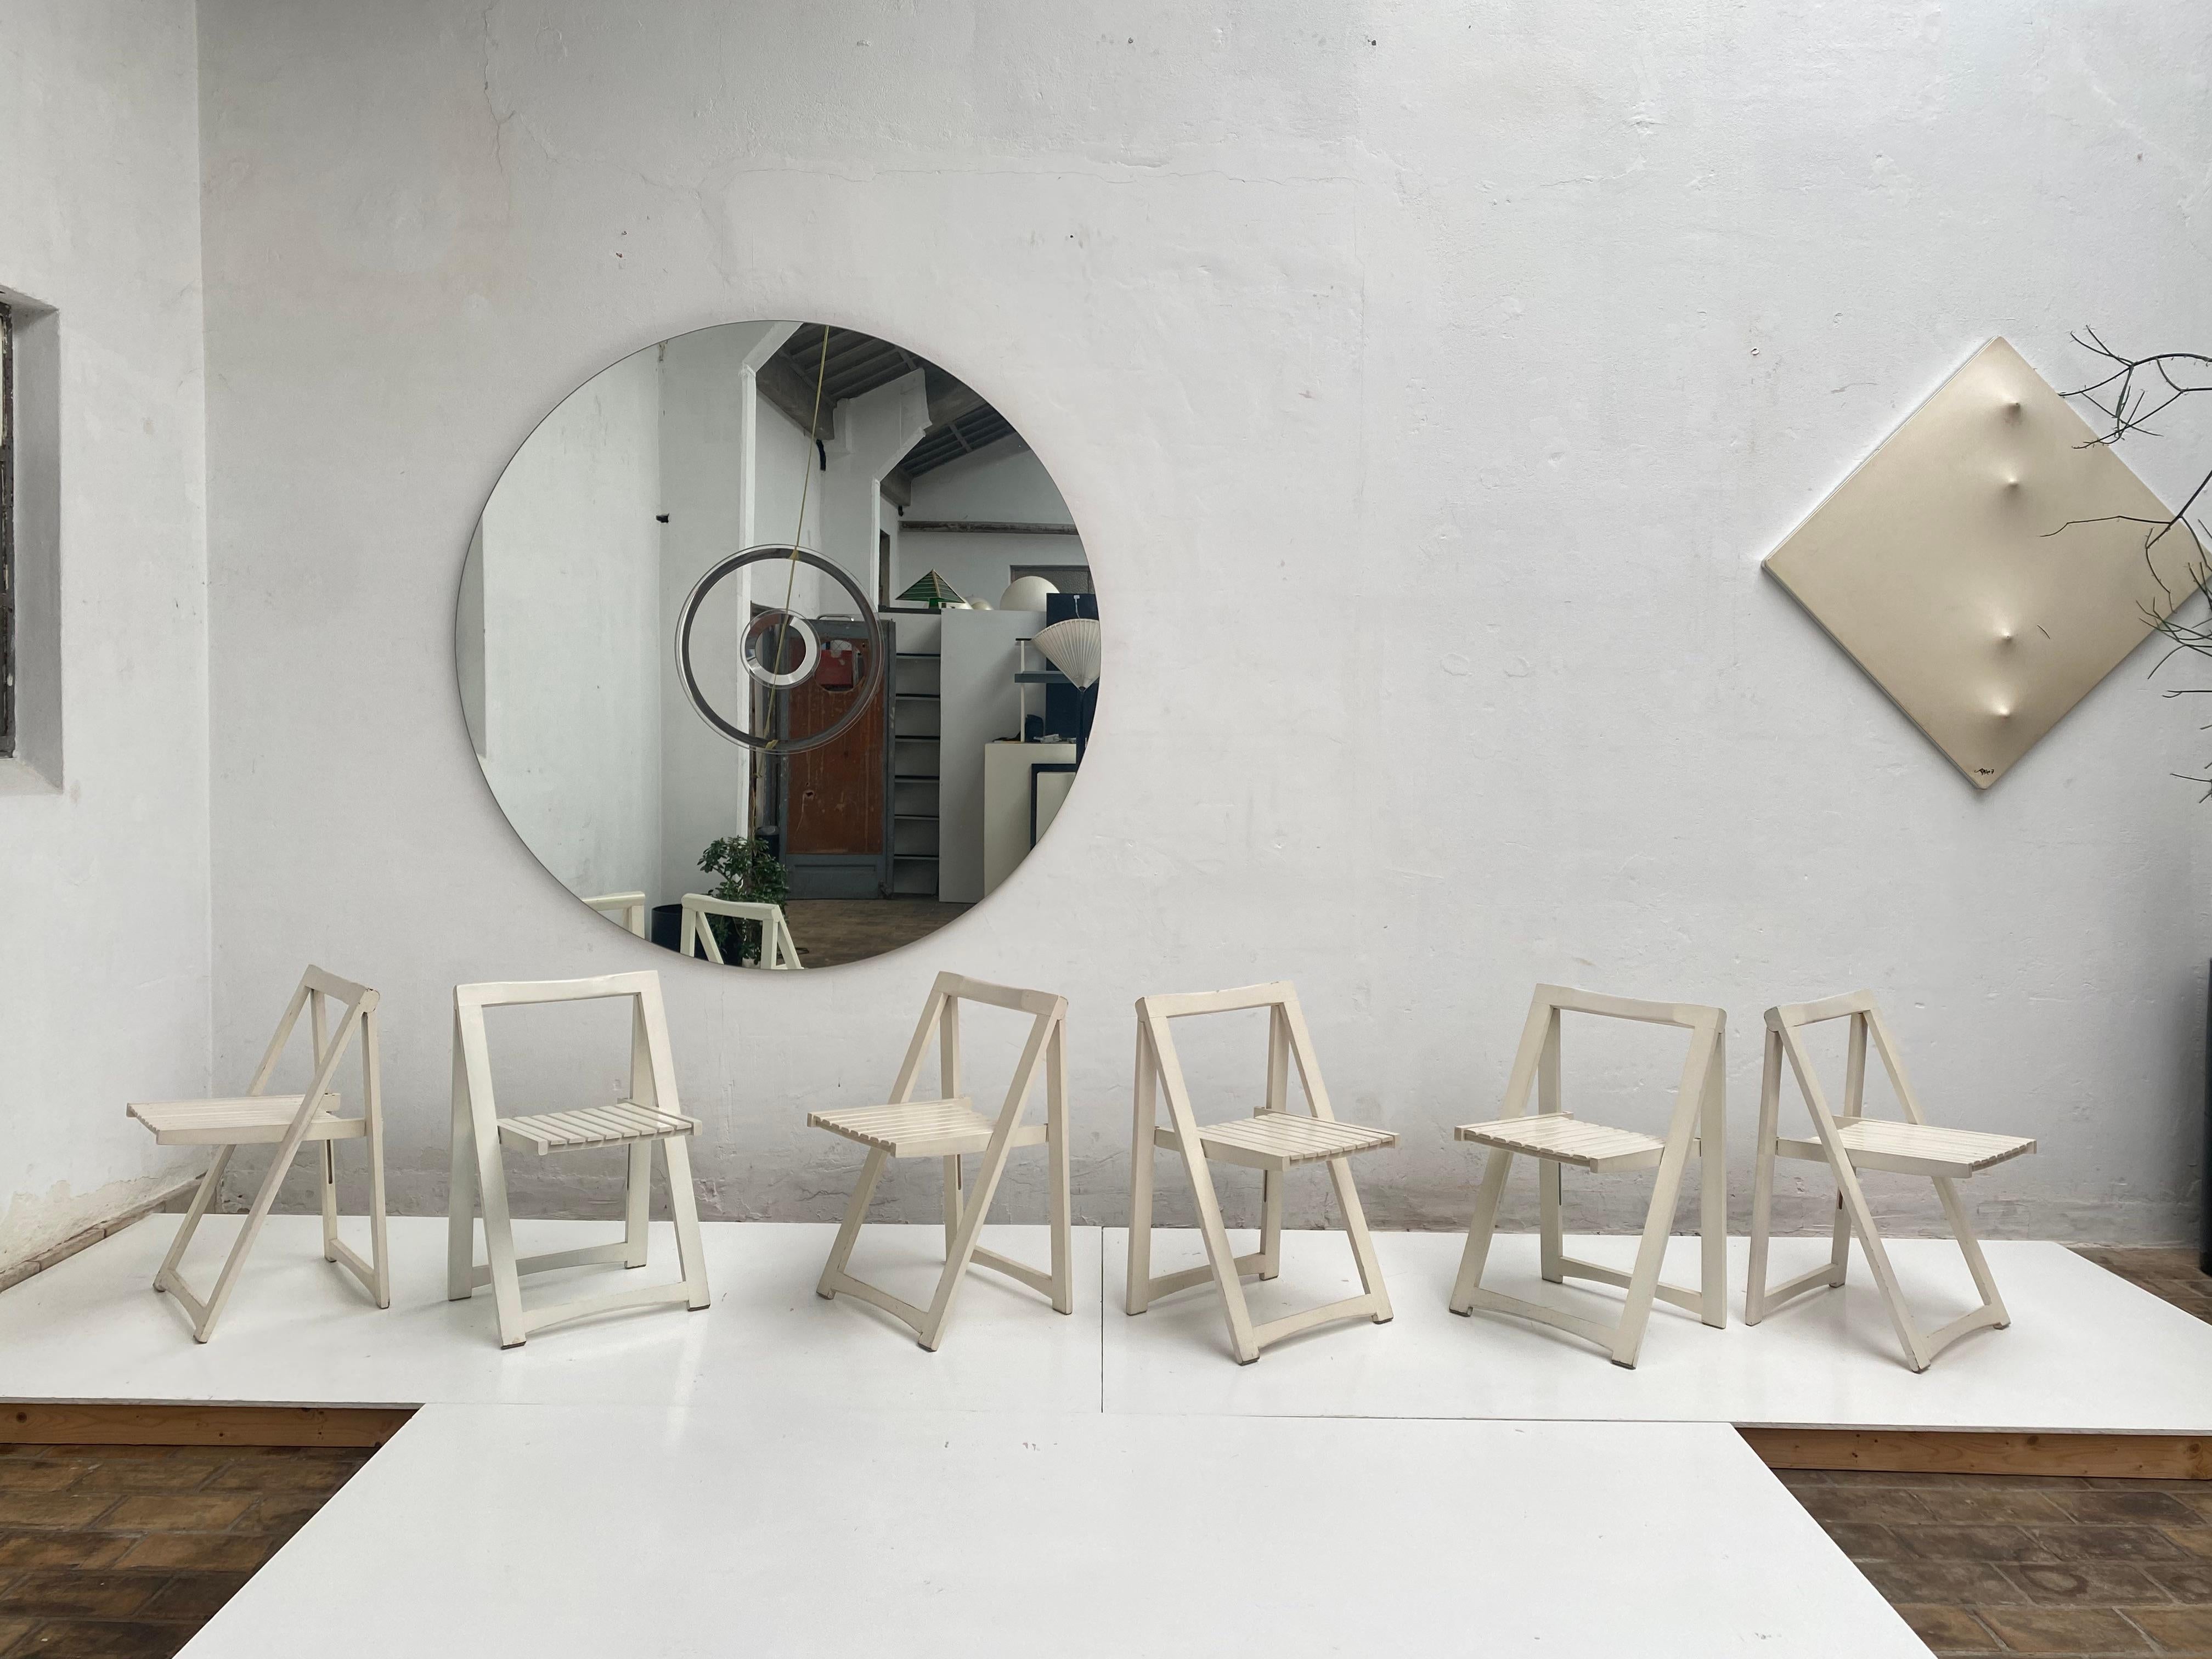 6 Folding Chairs attributed to Aldo Jacober for Alberto Bazzani 1960's

Original white stained solid Birch Wood in a nice original and honest vintage condition 

The folding design makes them practical/functional as they are easy to store when not